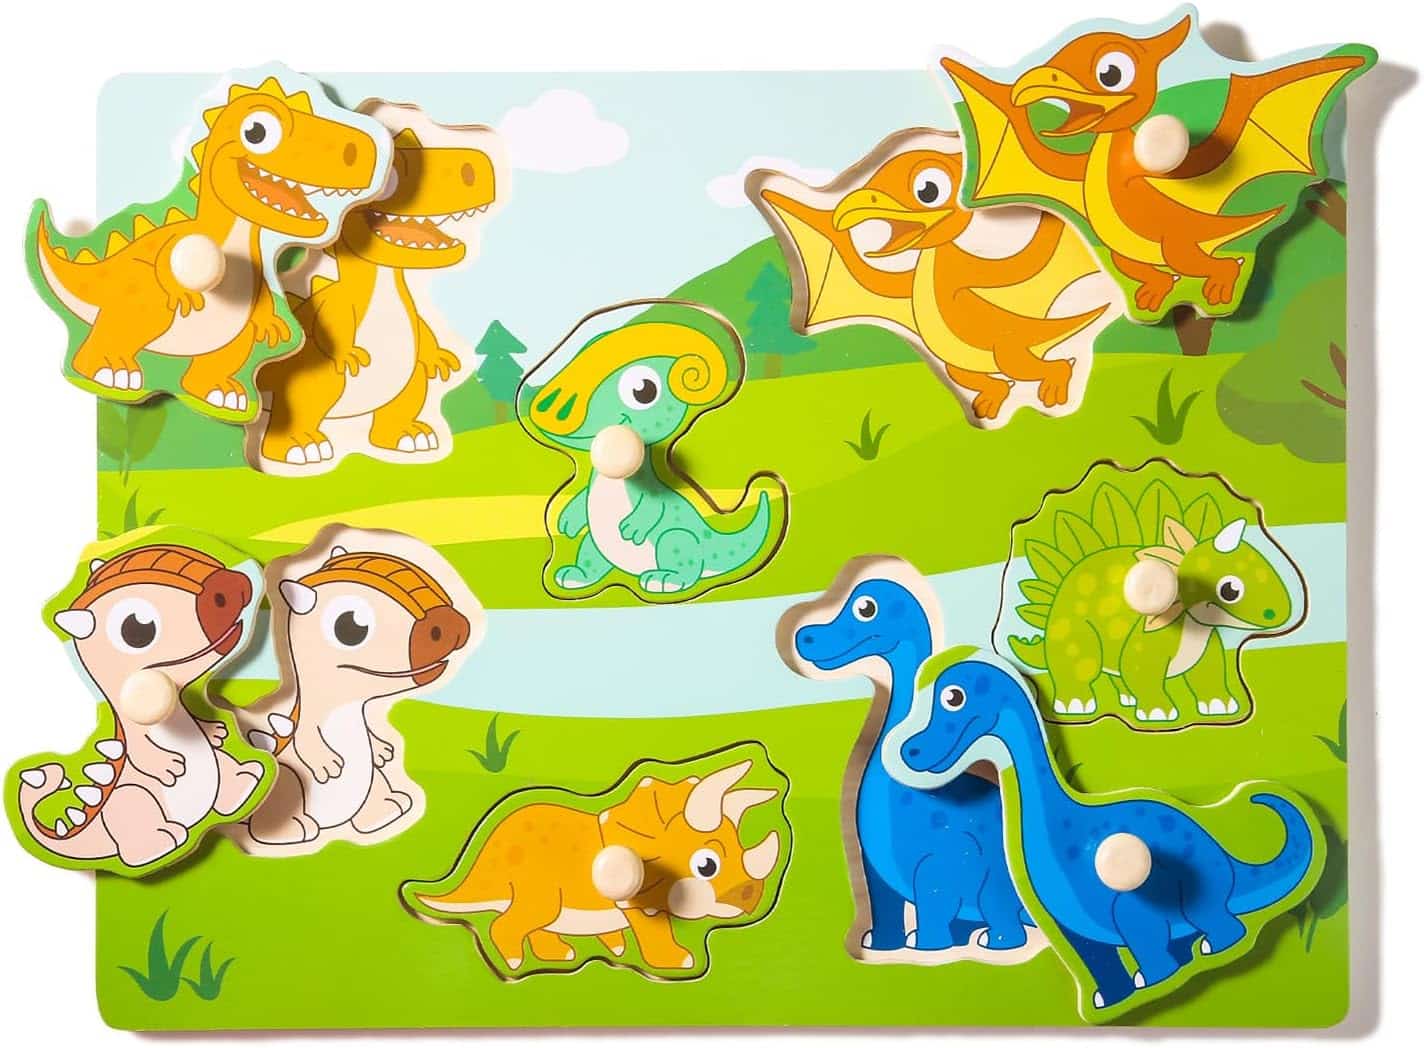 Wooden Puzzles for Toddlers 1-3, Dinosaurs Animals Peg Puzzles for Kids, Learning Educational Puzzles for Baby Puzzles 12-18 Months, Montessori Toys（Dinosaurs）